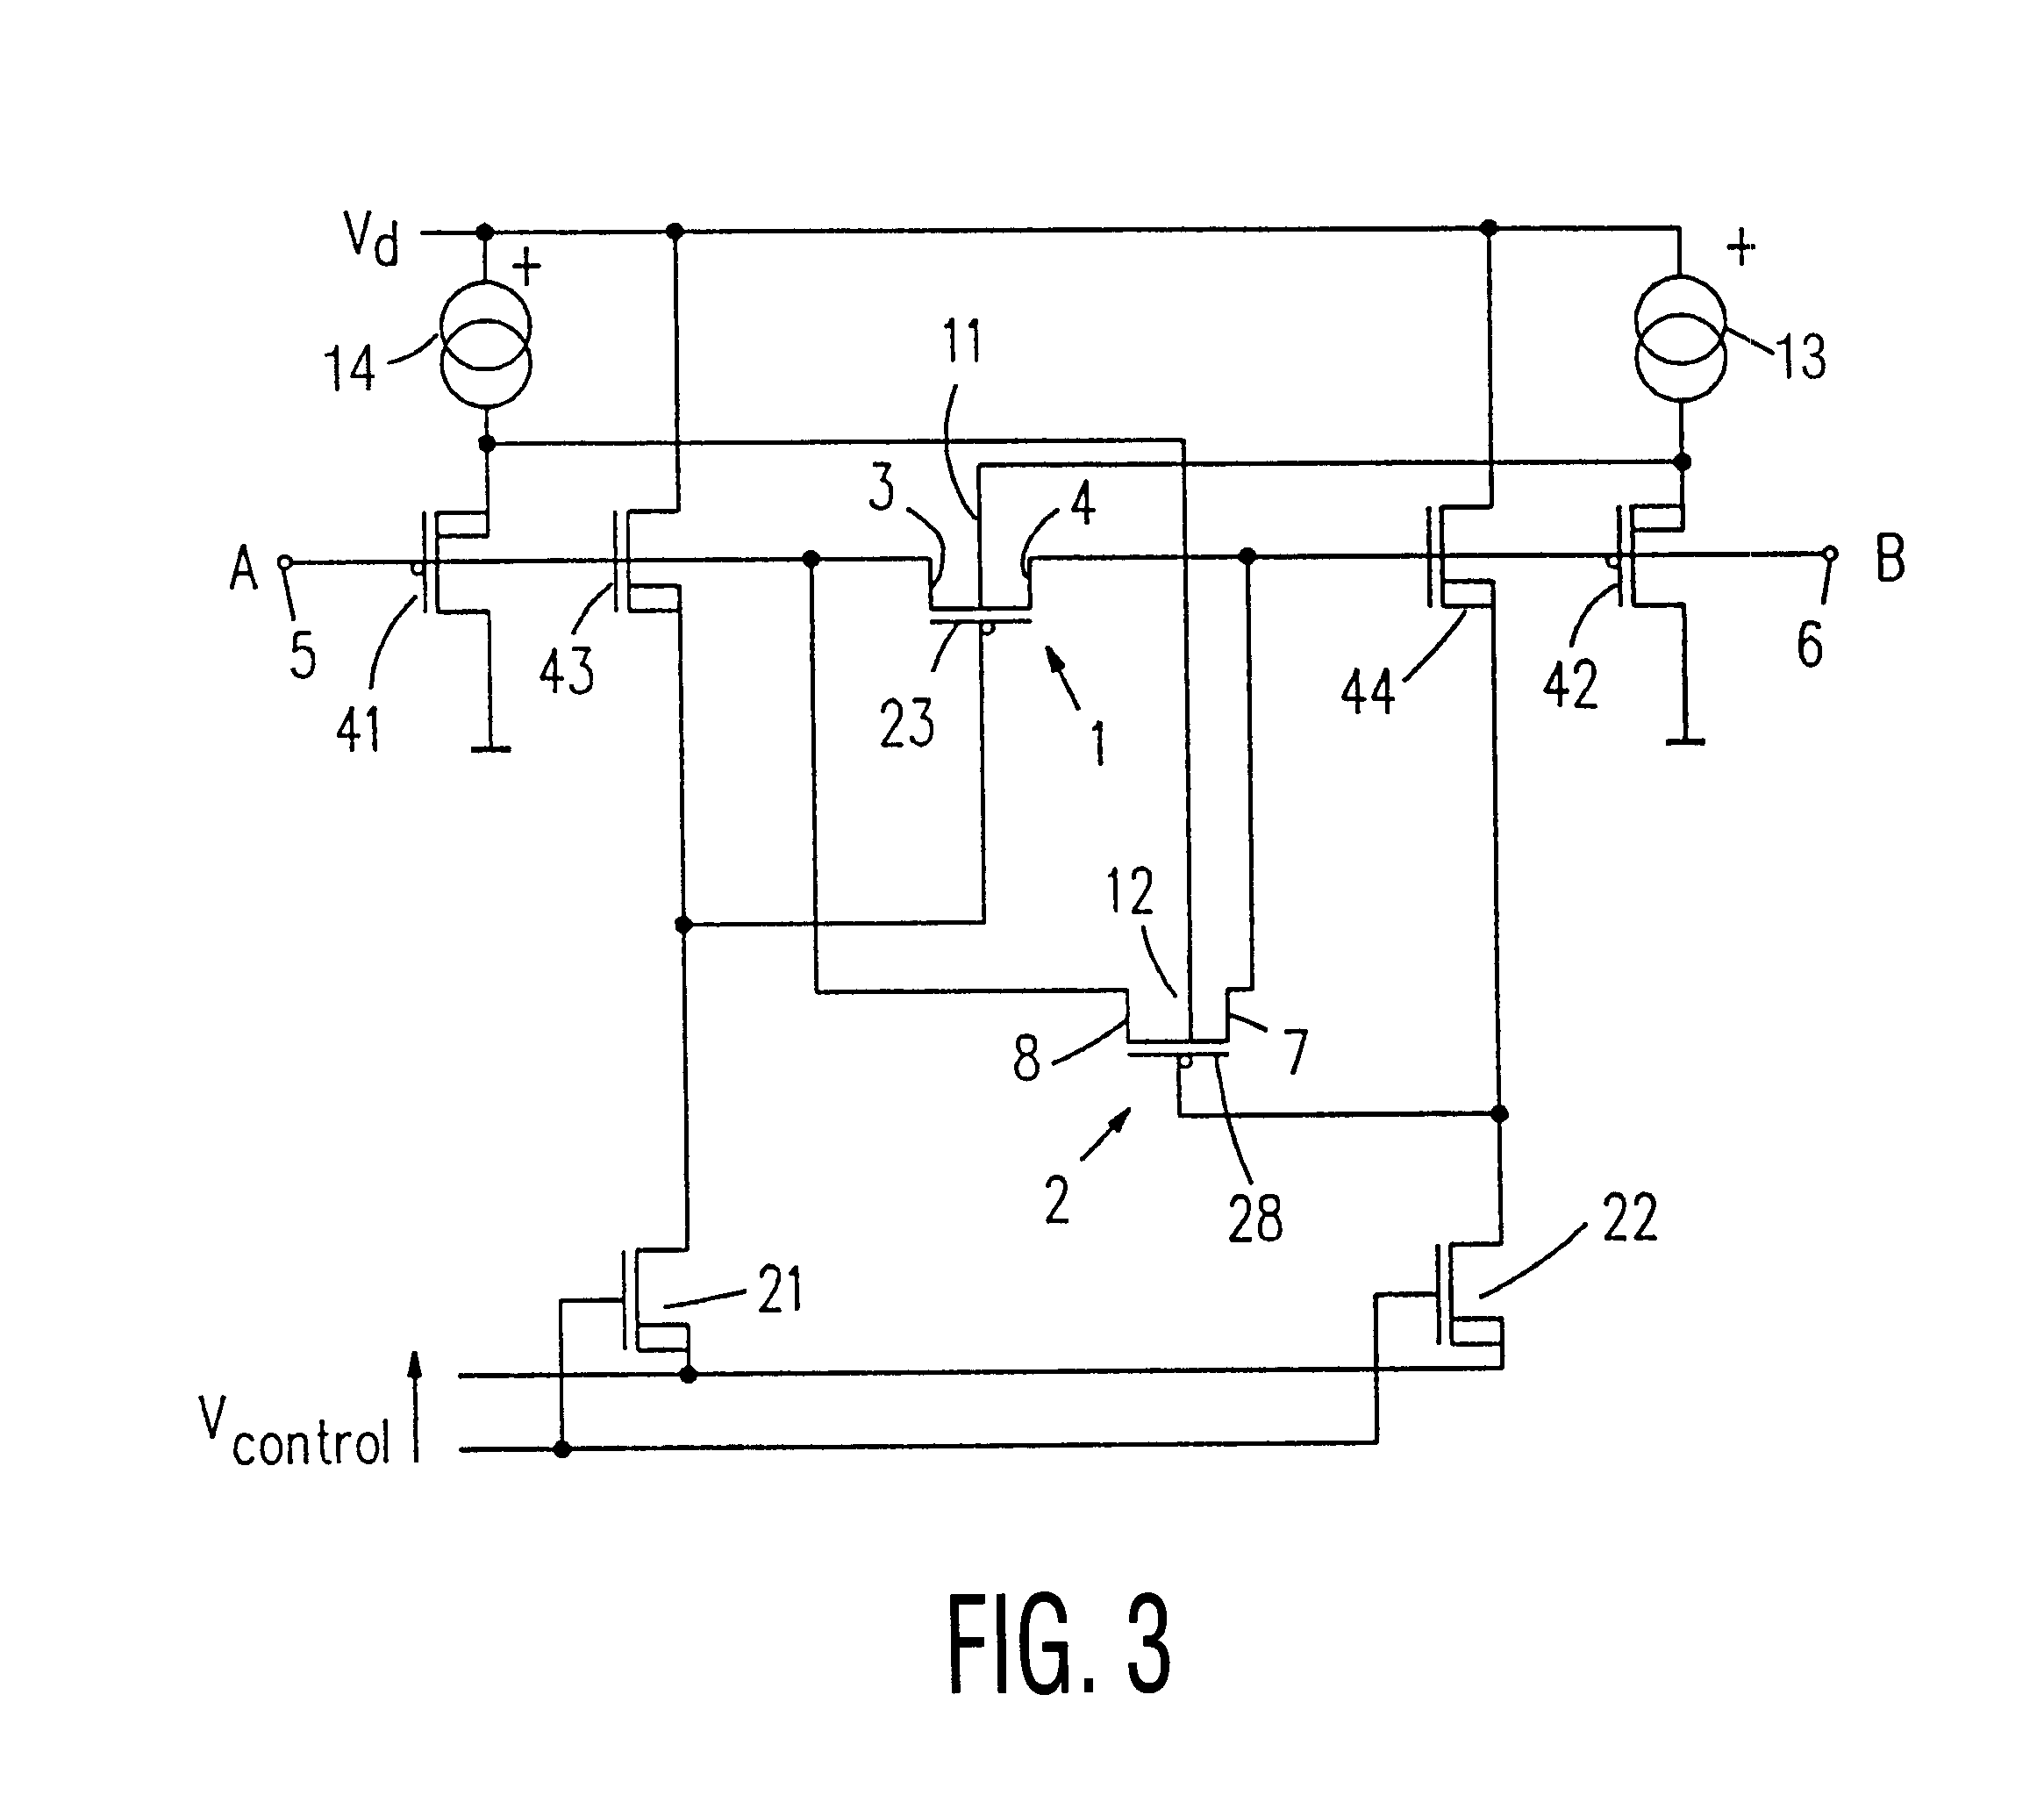 Electronic circuit with bulk biasing for providing accurate electronically controlled resistance